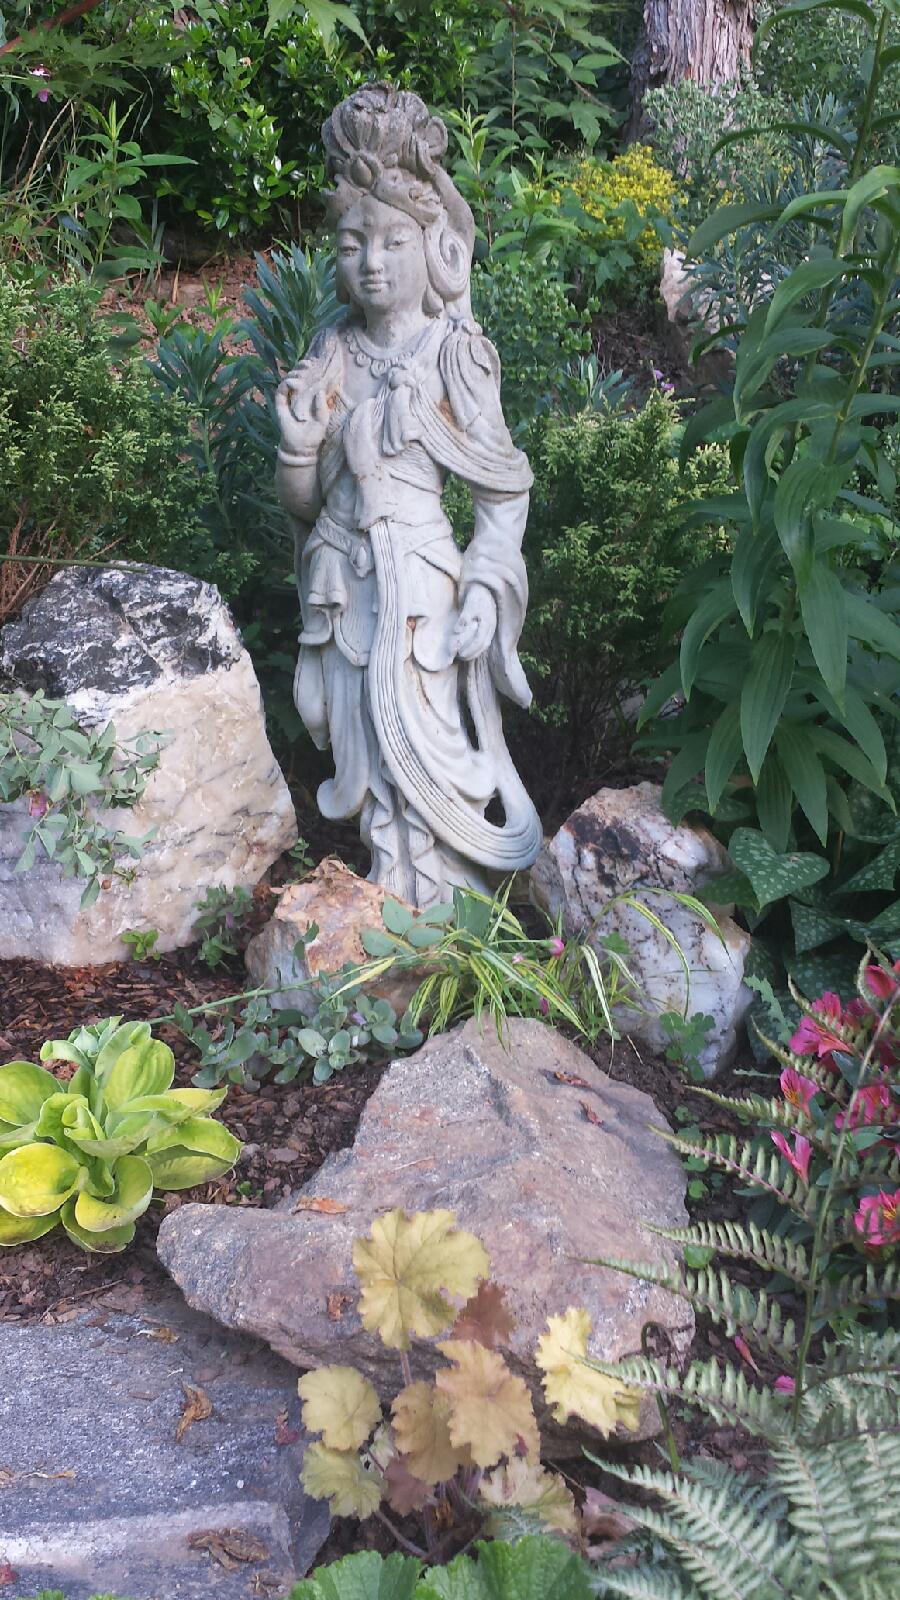 Cynthia added large stones and art work to balance out her love of flowers, and anchor the garden.&nbsp;An easy fix for areas in our gardens that lack structure.